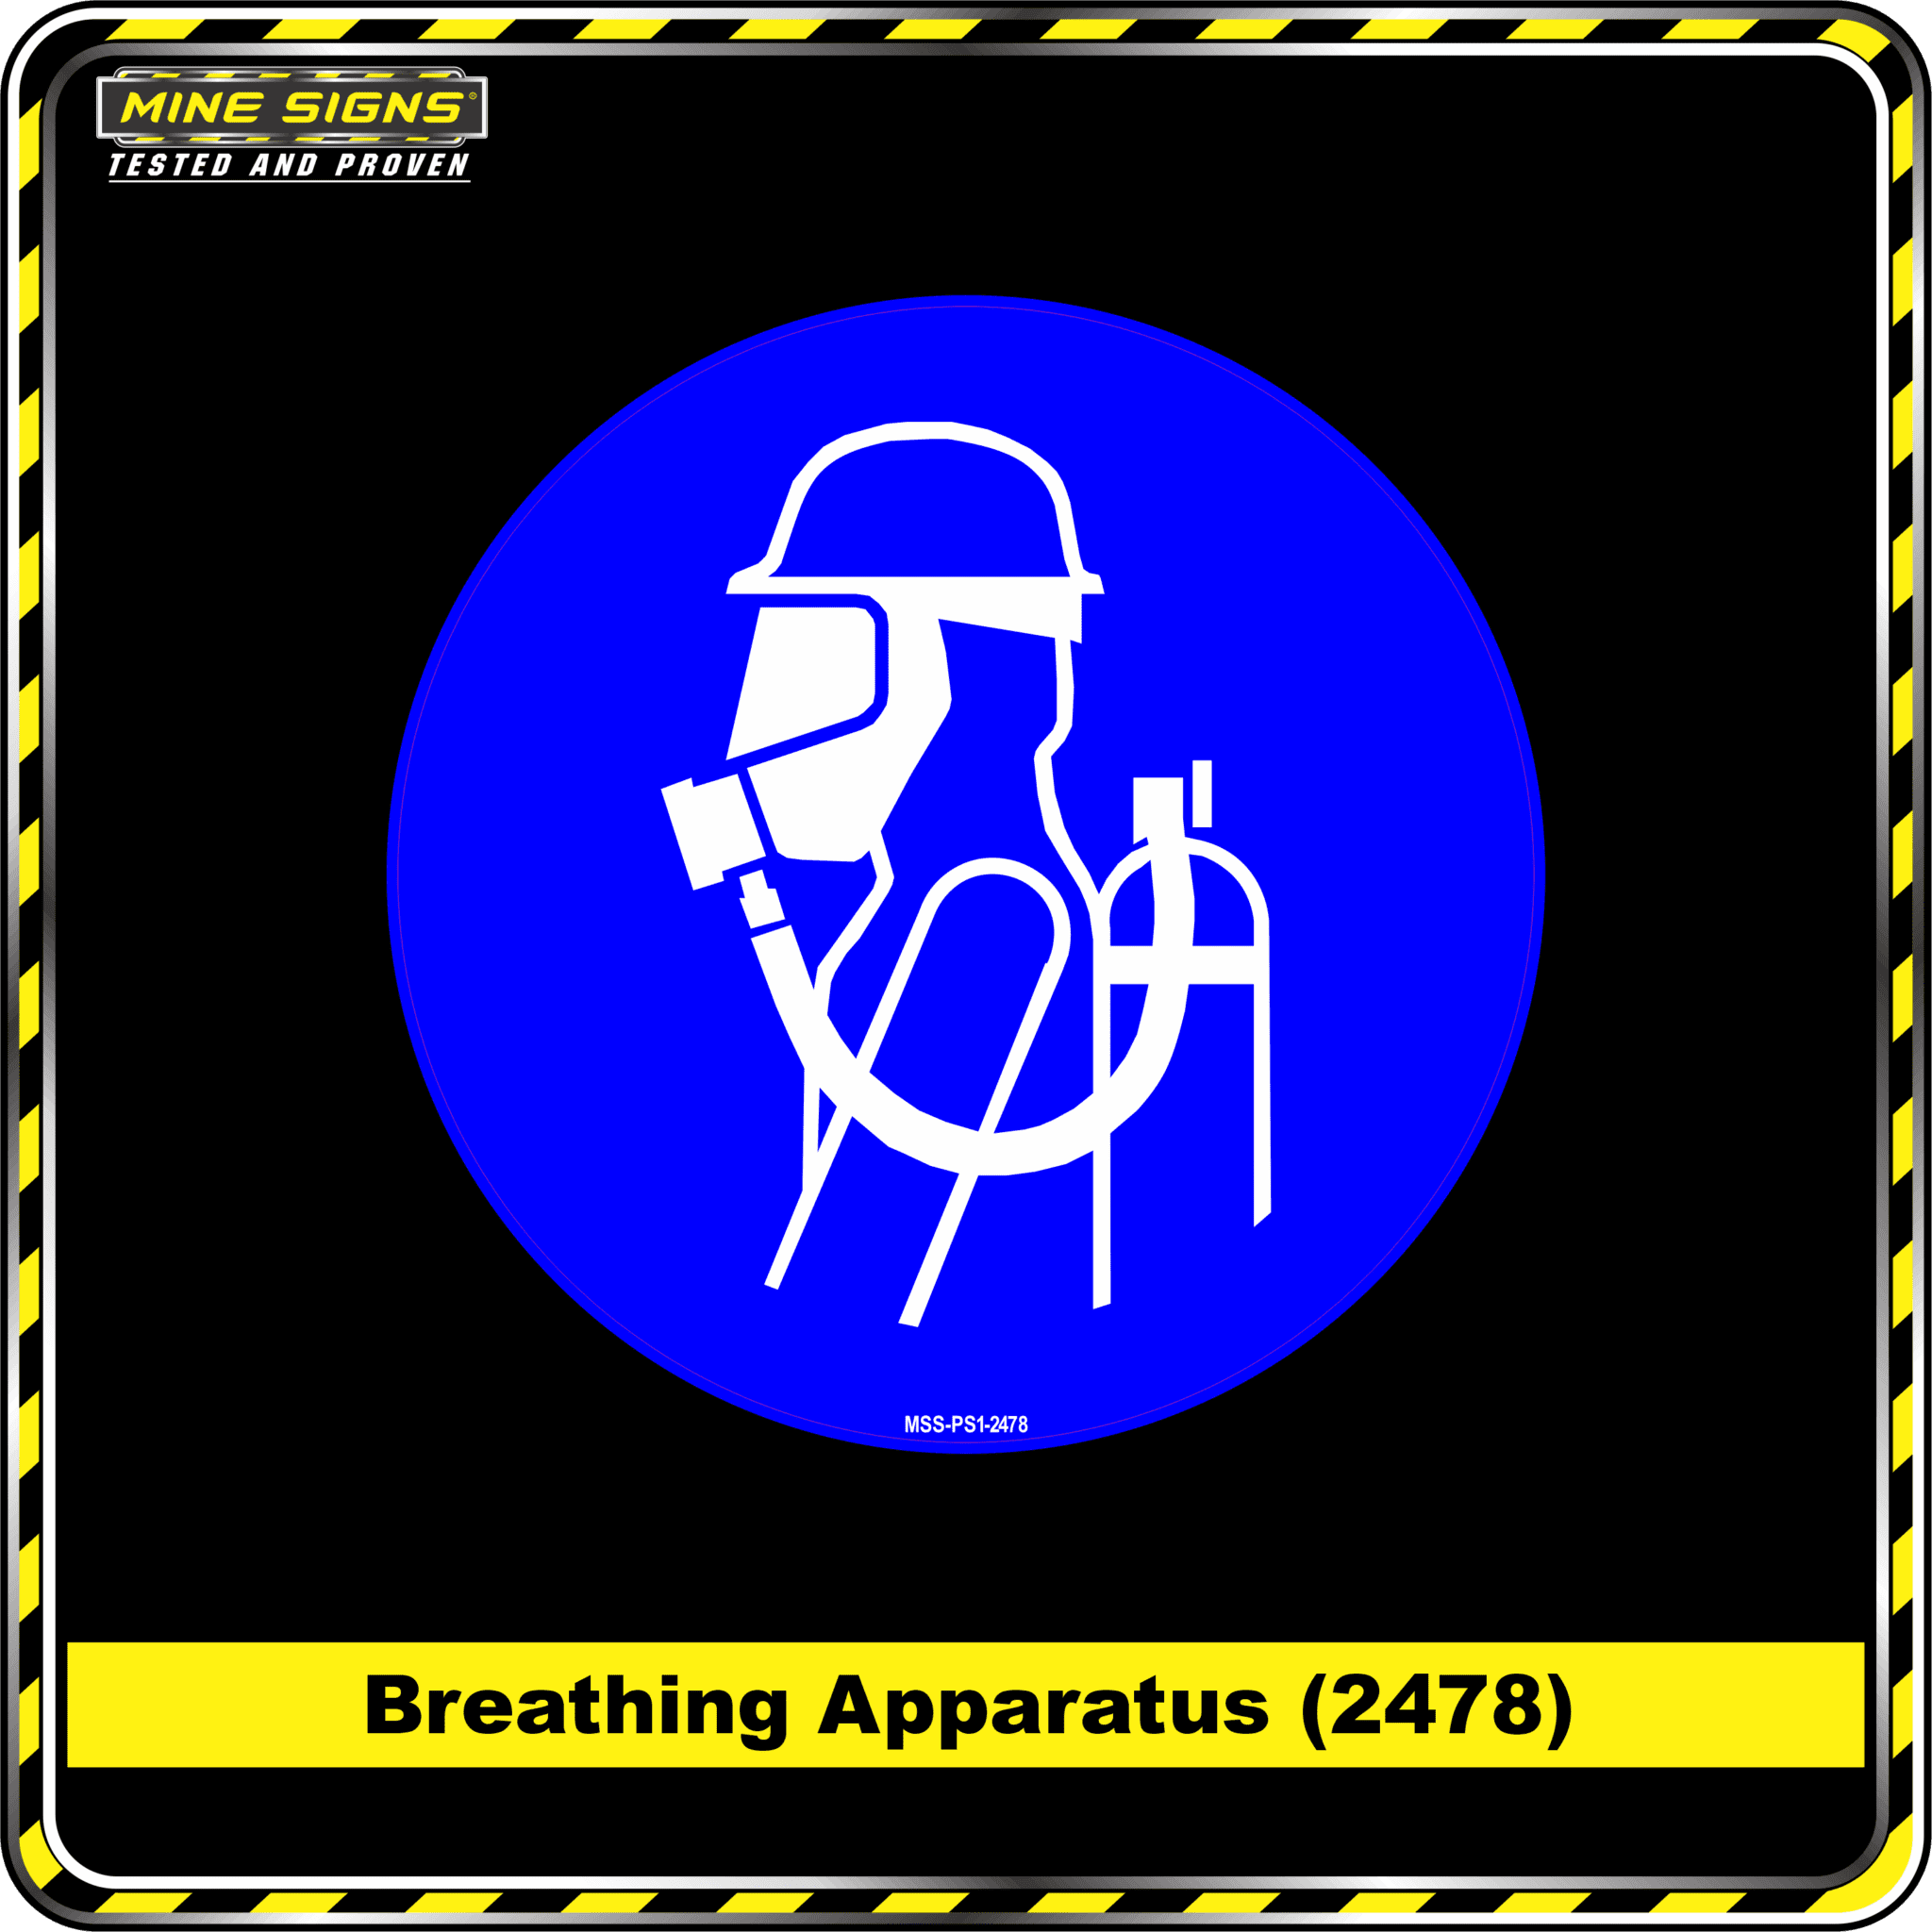 MS - Product Background - Safety Signs - Breathing Apparatus 2478